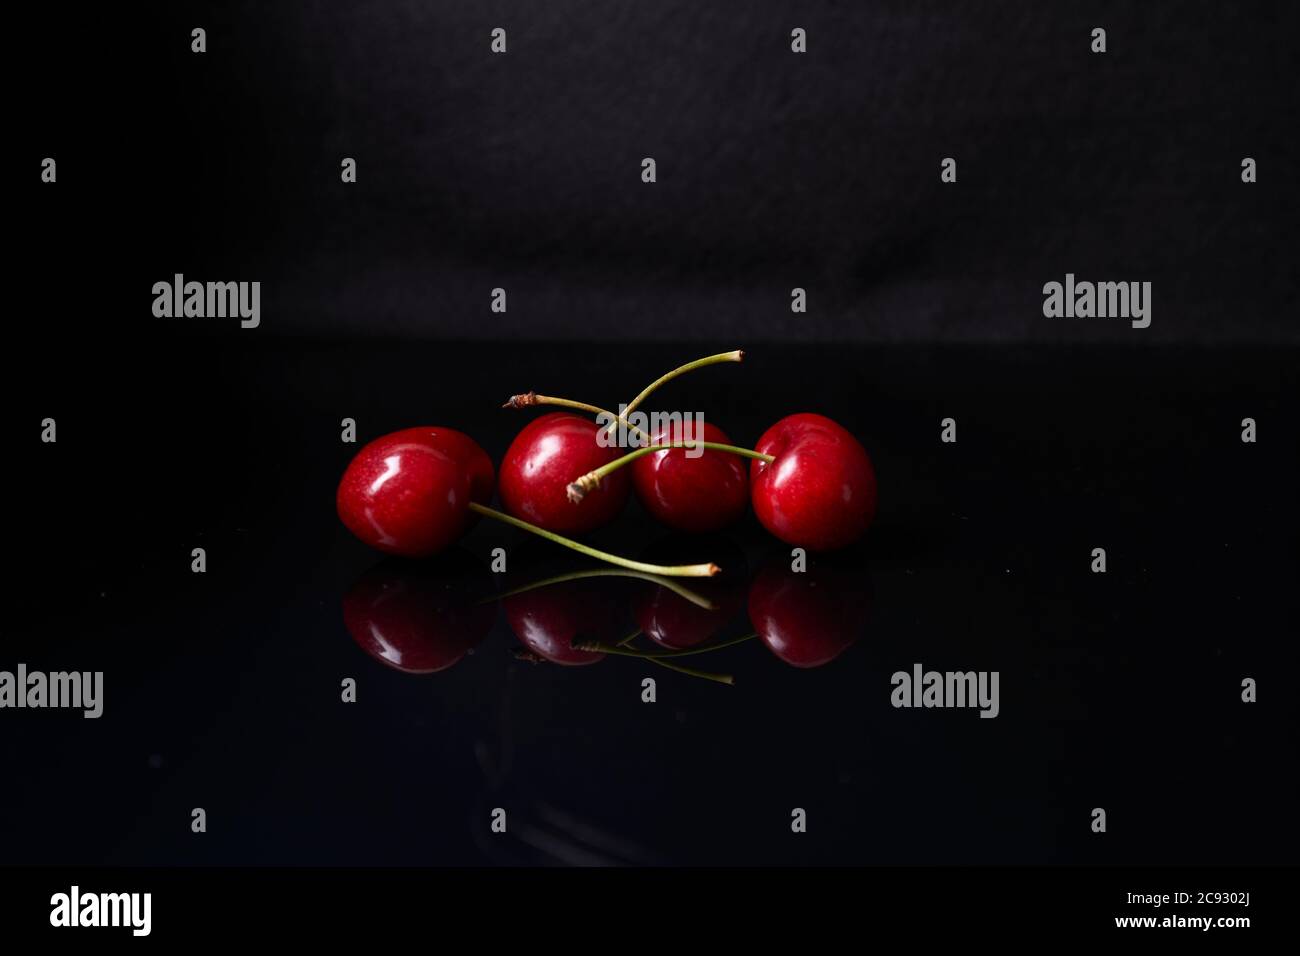 reflection of four cherries on black background Stock Photo